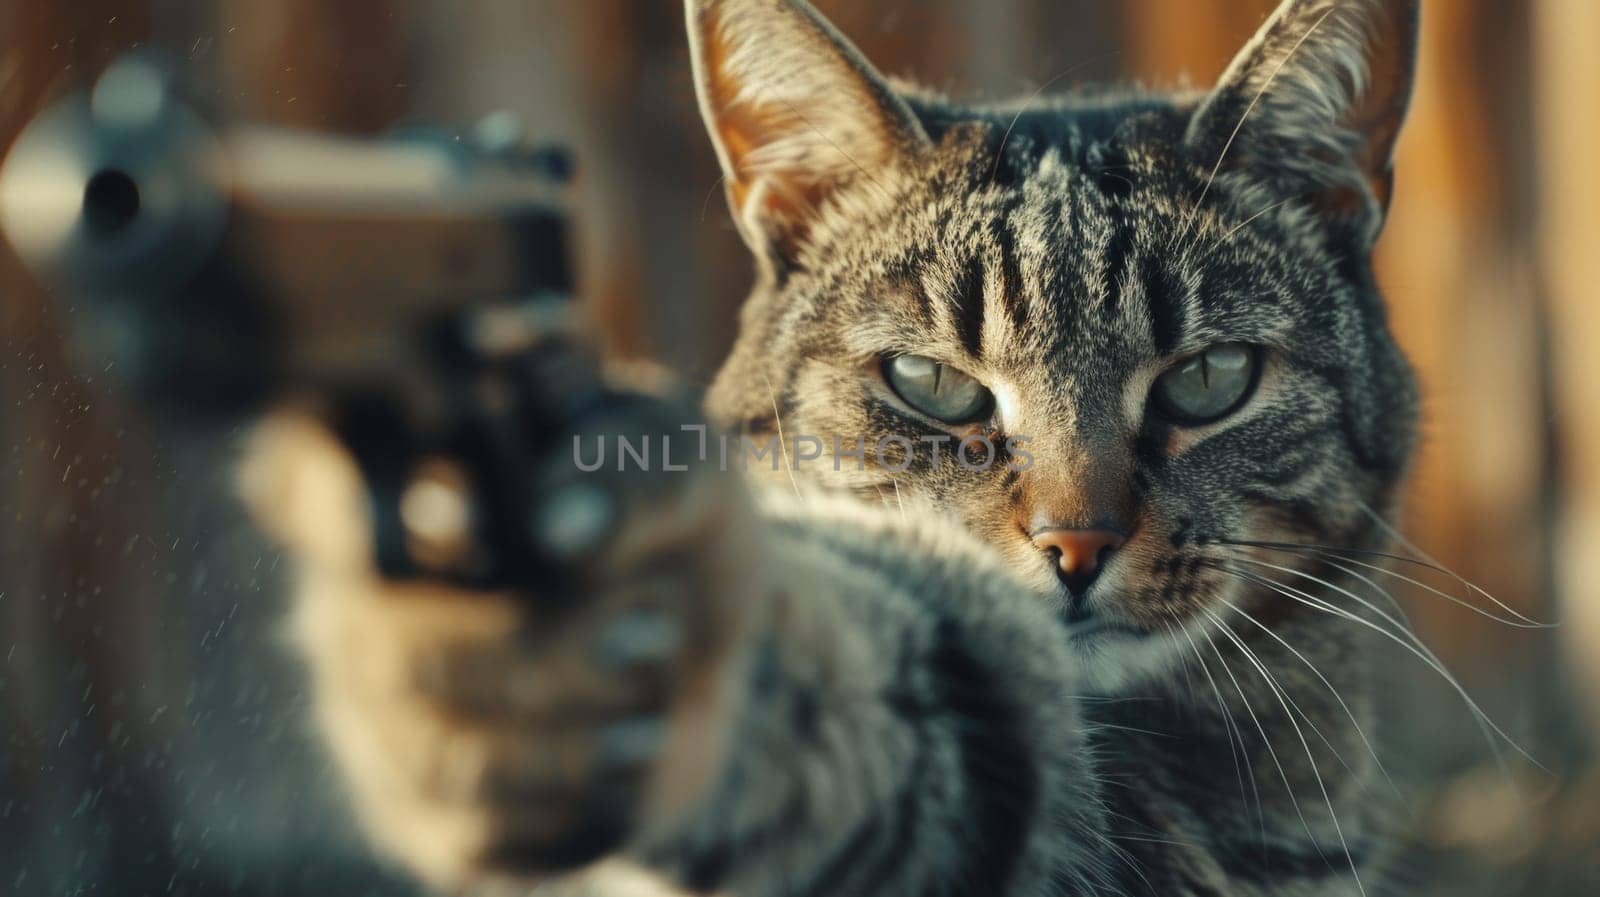 A cat with a gun pointing at something in the distance